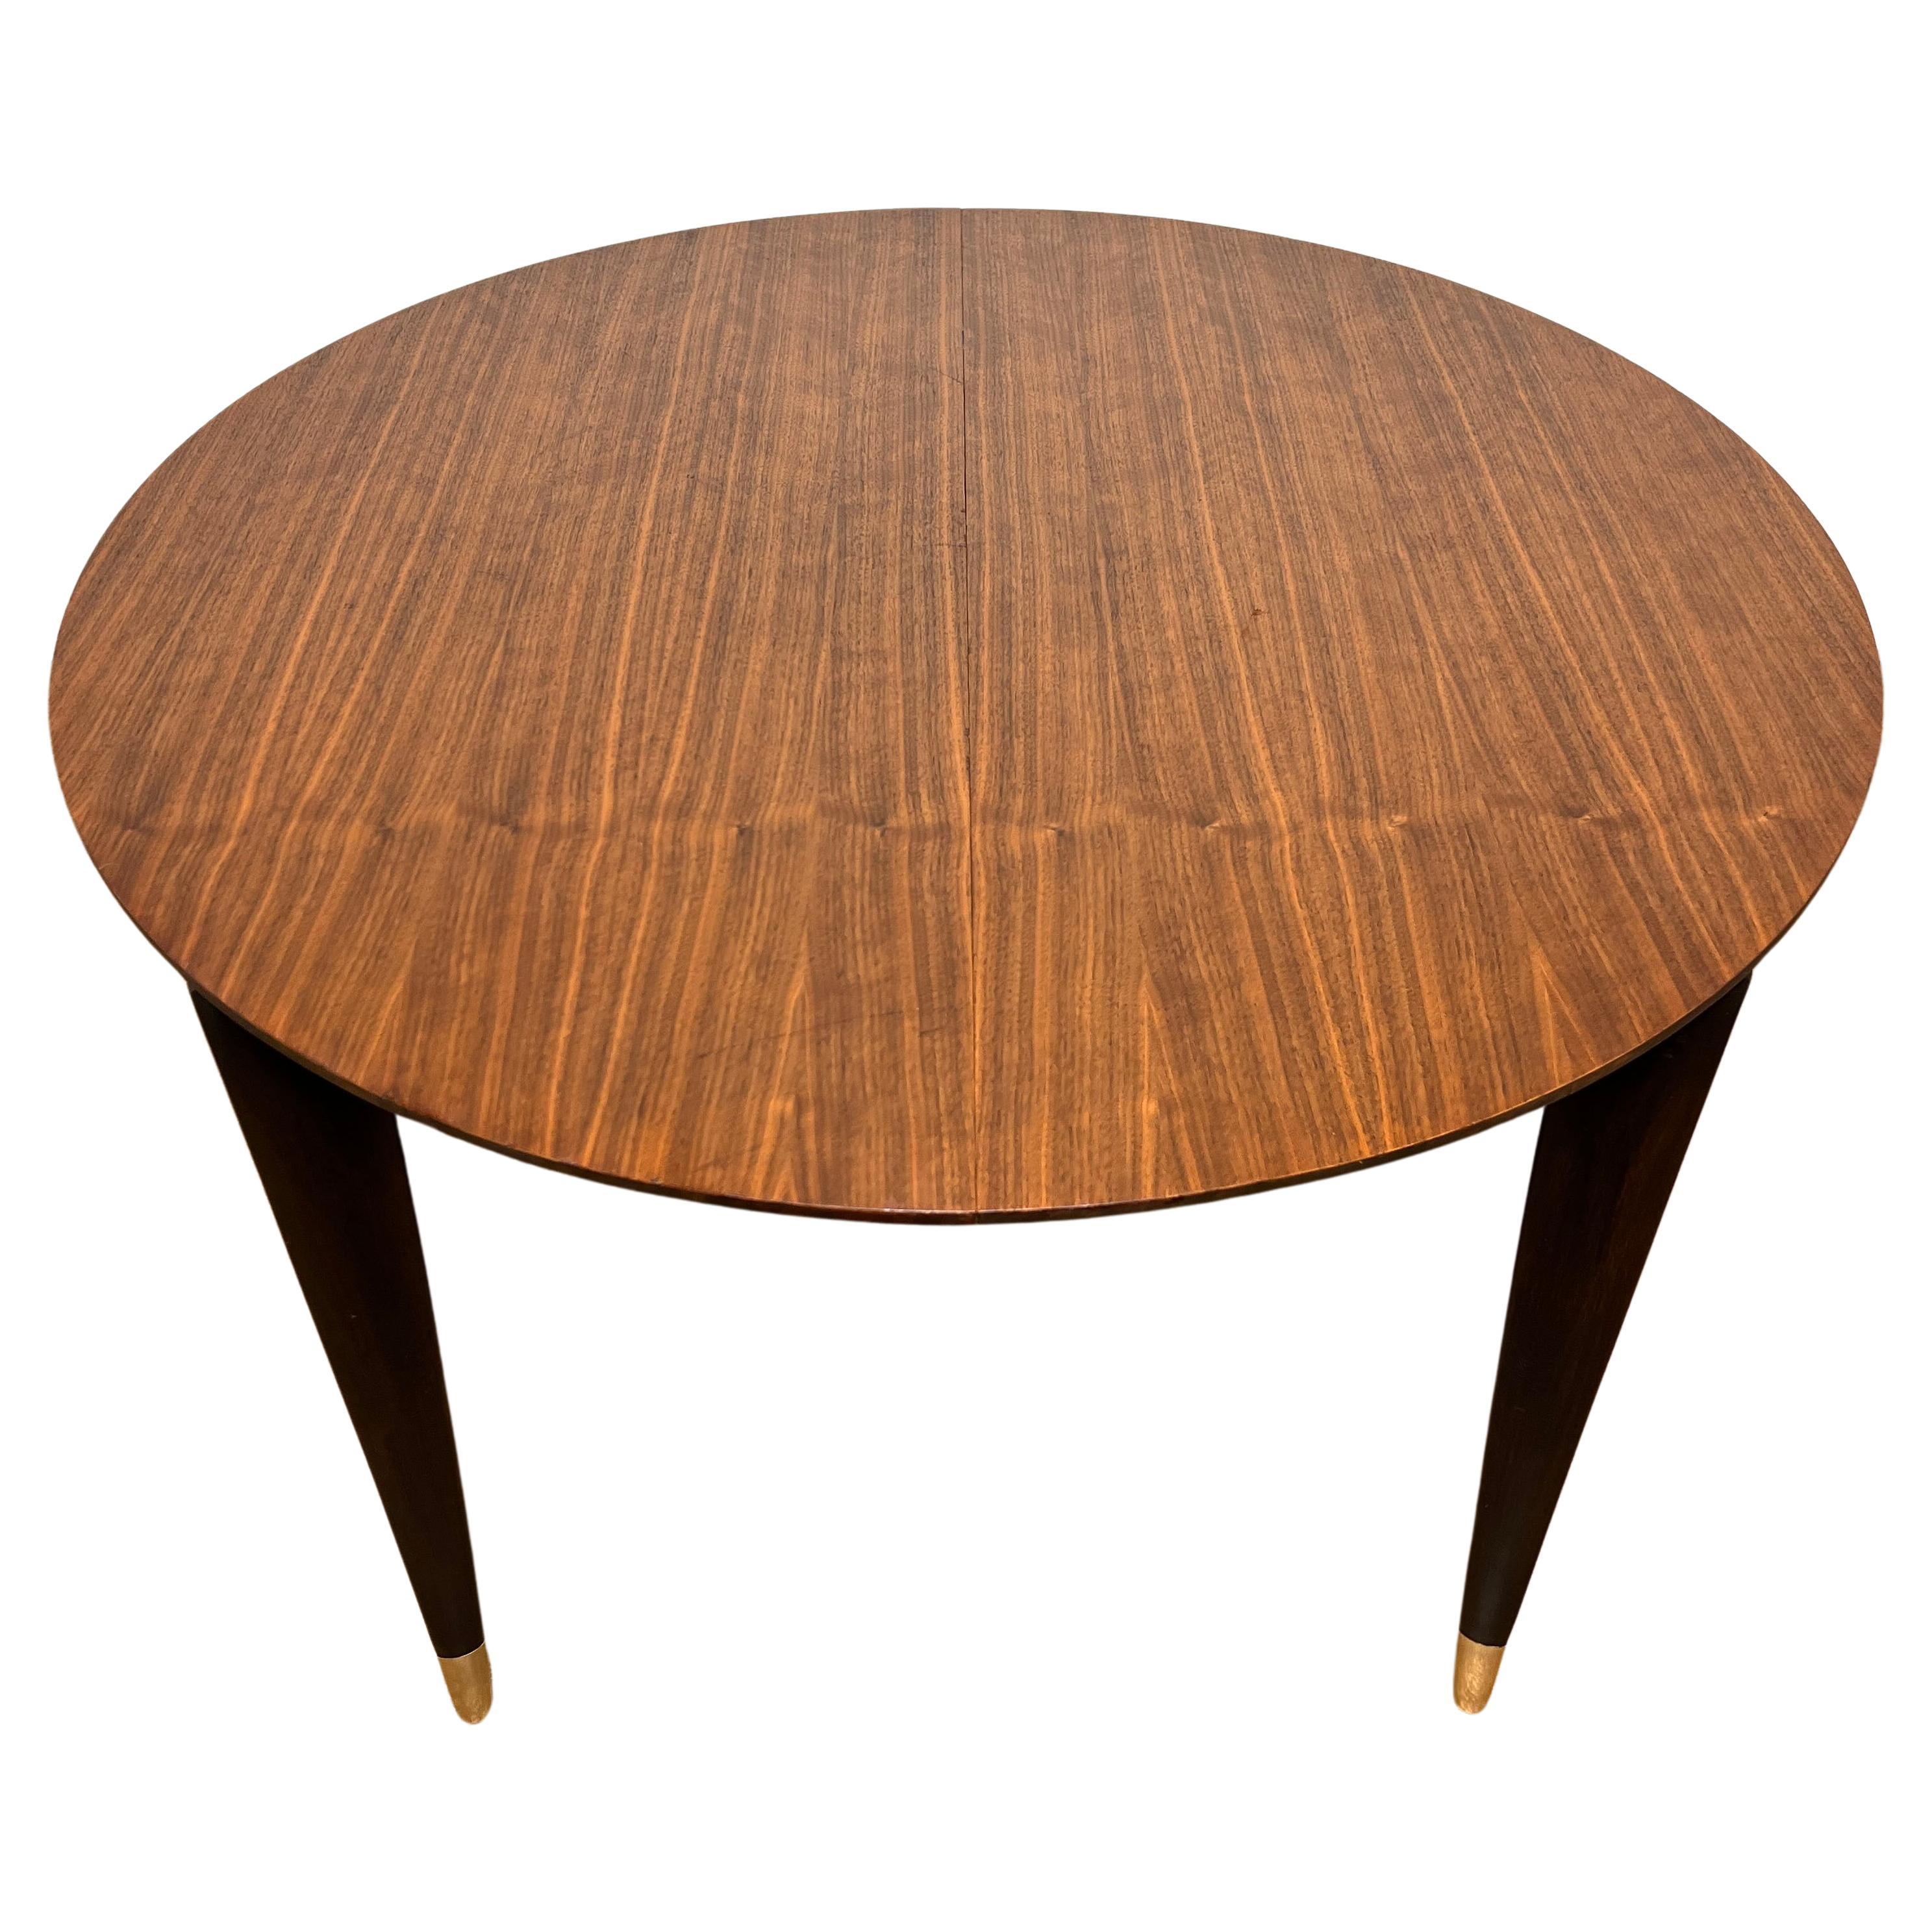 Gio Ponti for Singer Dining Table in Walnut With Brass Sabots Circa 1950s For Sale